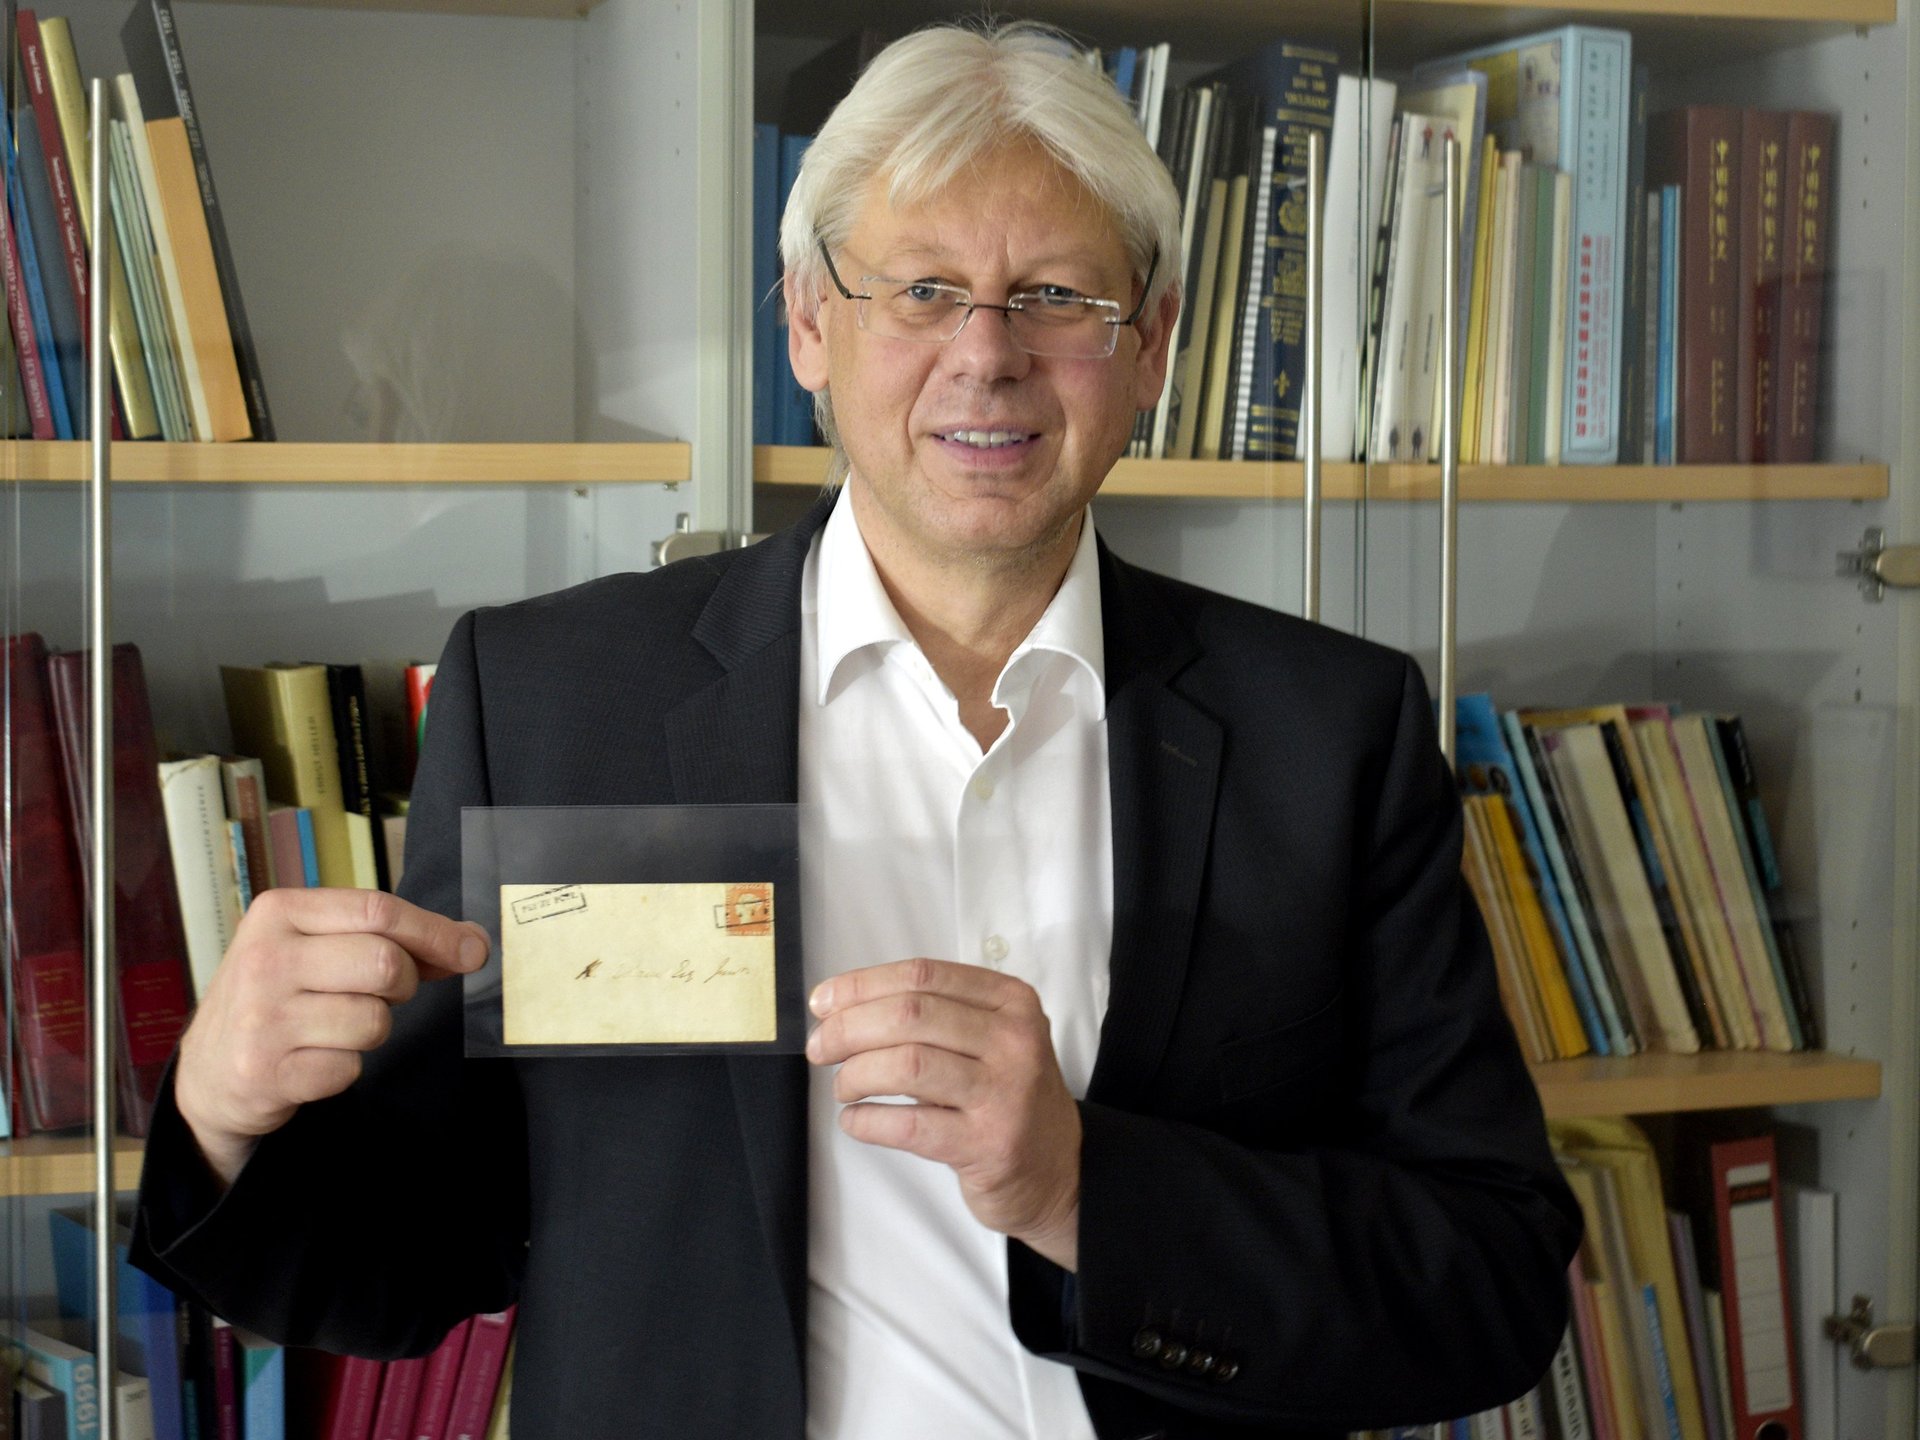 CEO Christoph Gärtner stands in his philatelic library, happily holding the Mauritius Ball Cover in his hands.